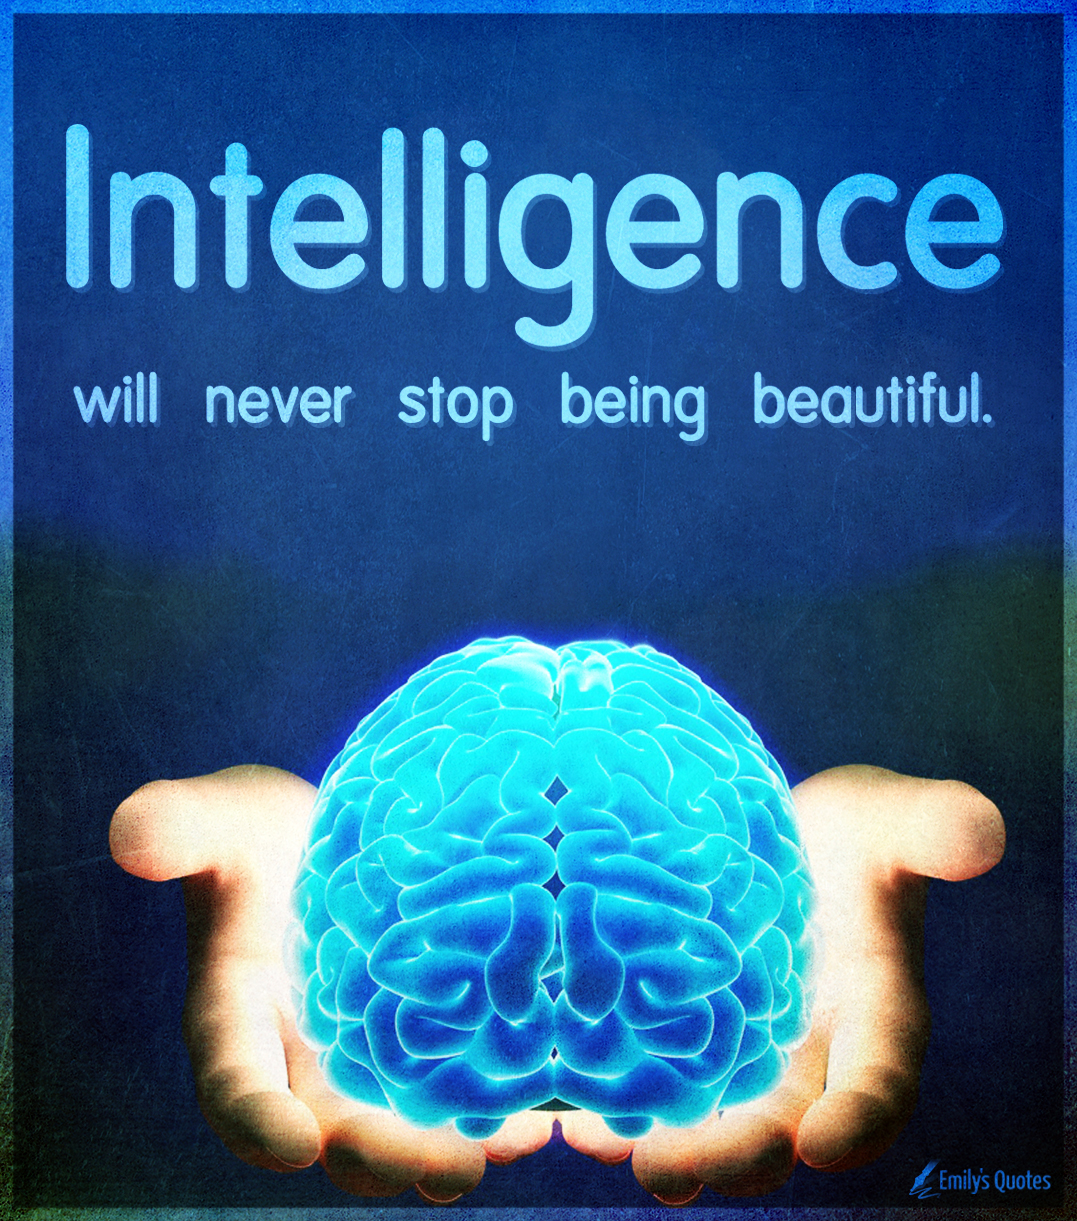 Intelligence will never stop being beautiful